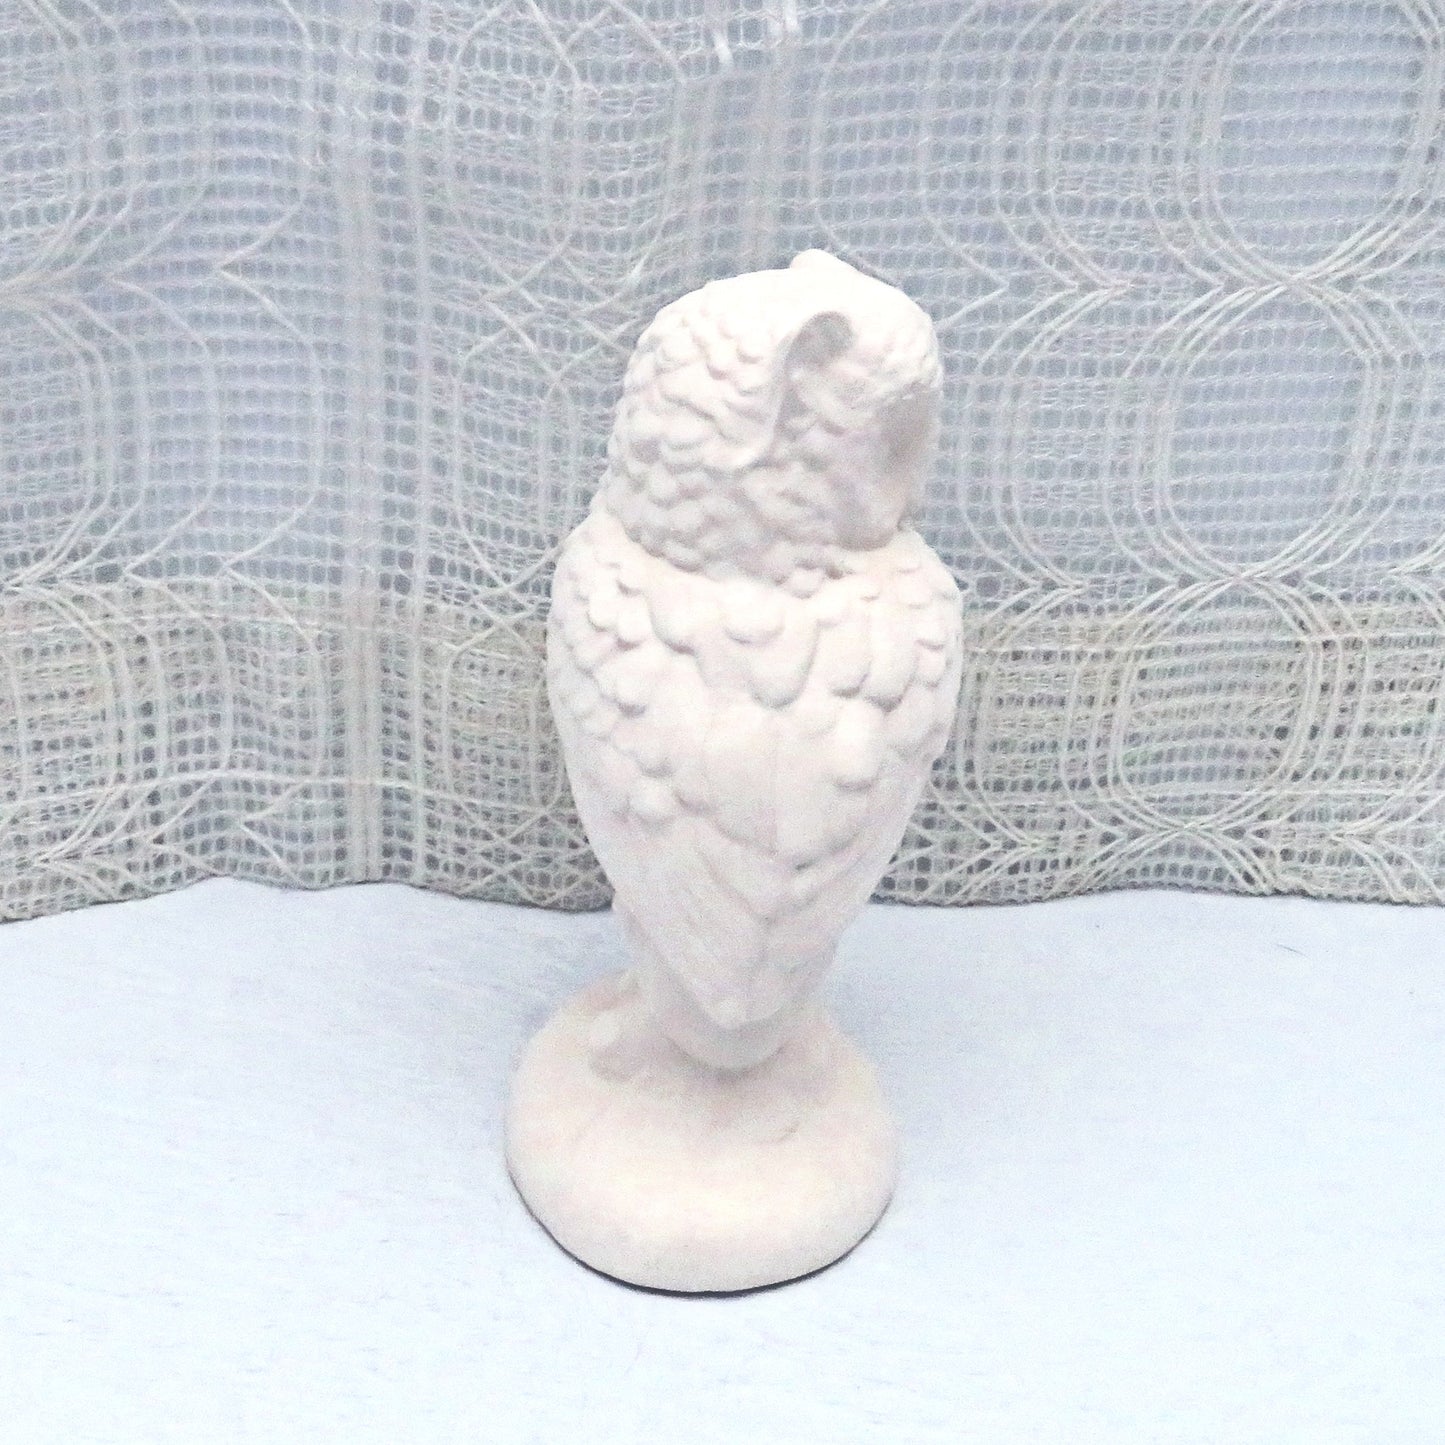 Rear view of paintable ceramic owl figurine showing the detail in the feathers.  Its head is turned toward the right.